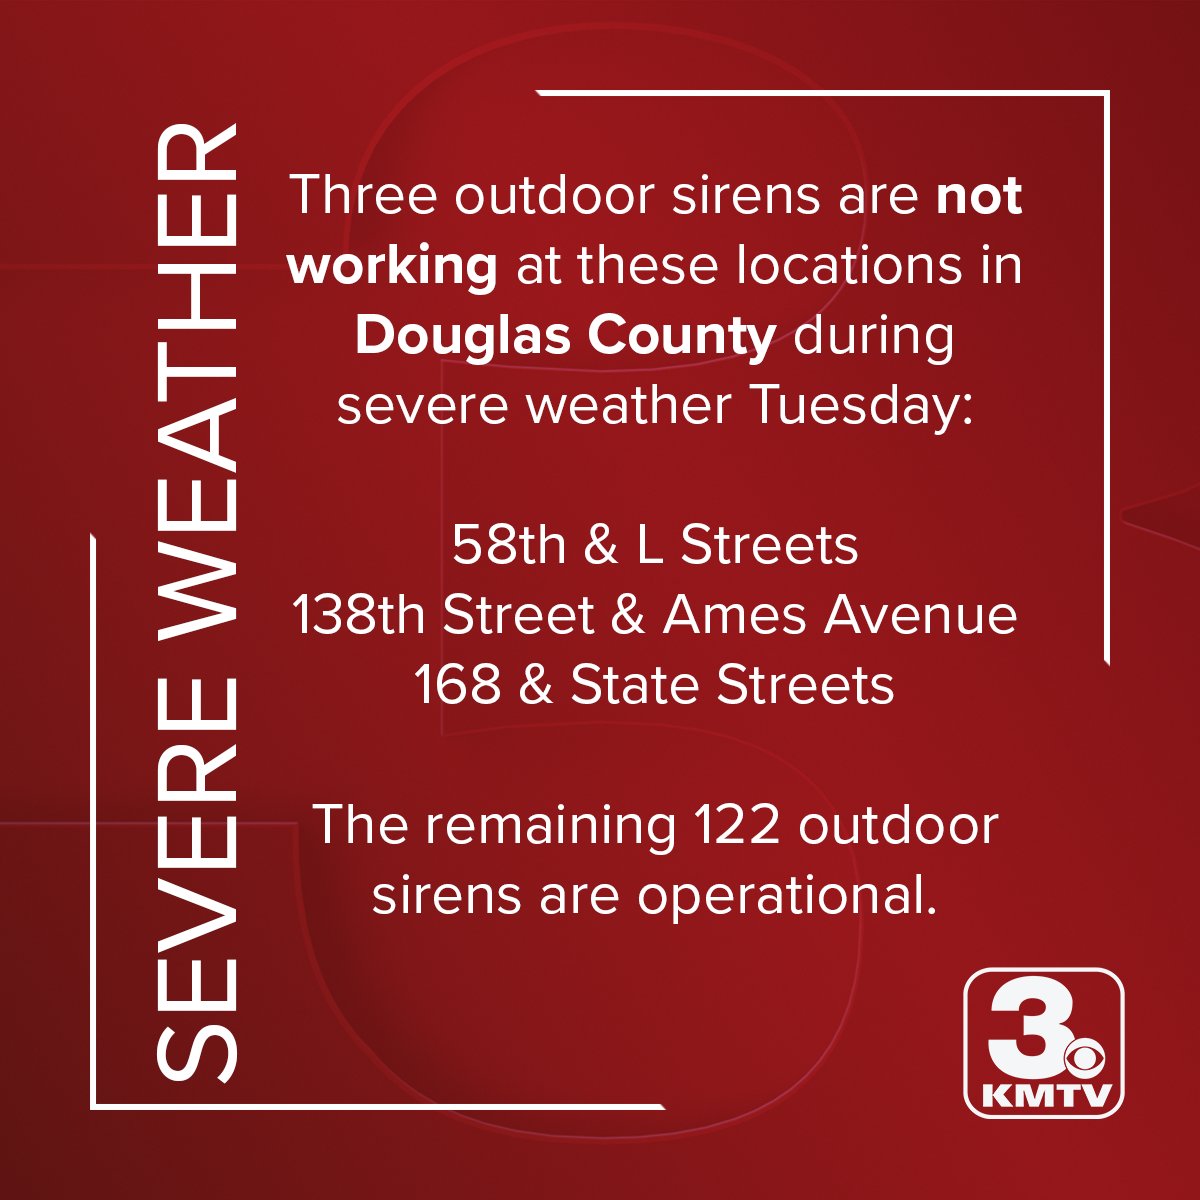 BE AWARE: Outdoor sirens at these three locations are not operational right now. Pass along if you know someone living in these areas. Updates: 3newsnow.com/weather/weathe…